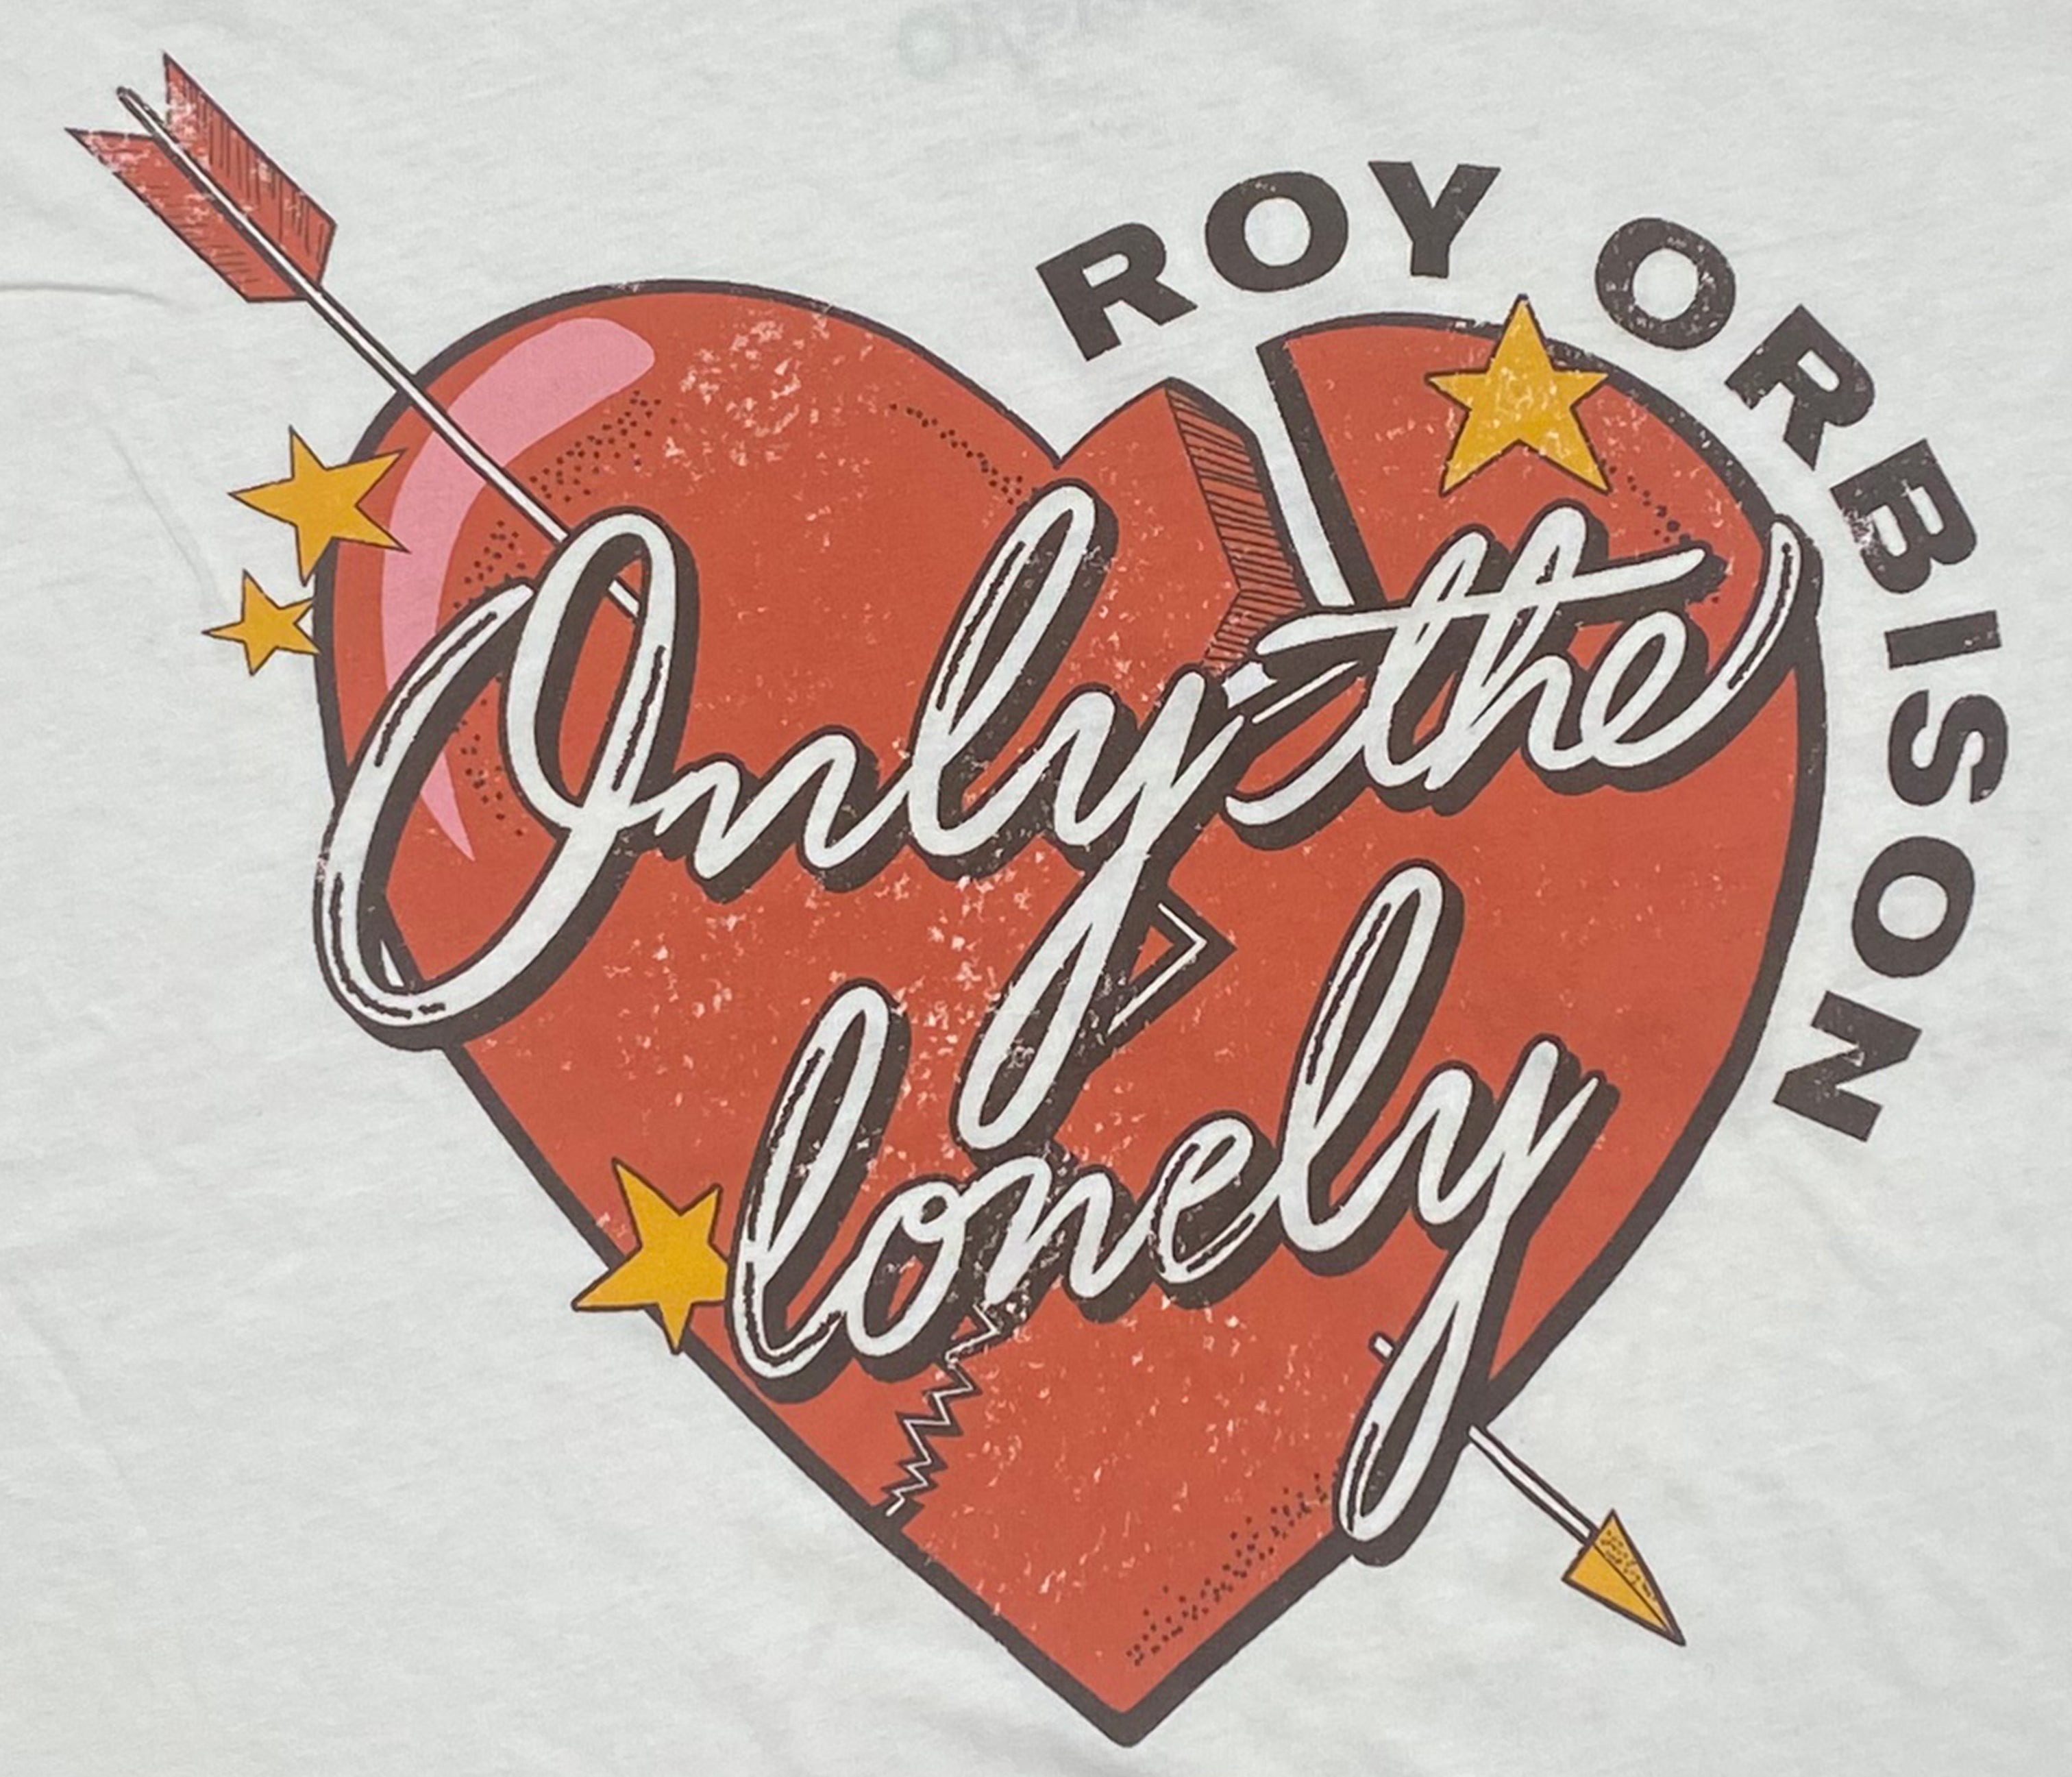 Roy Orbison Only the Lonely Cut off Crop Tee